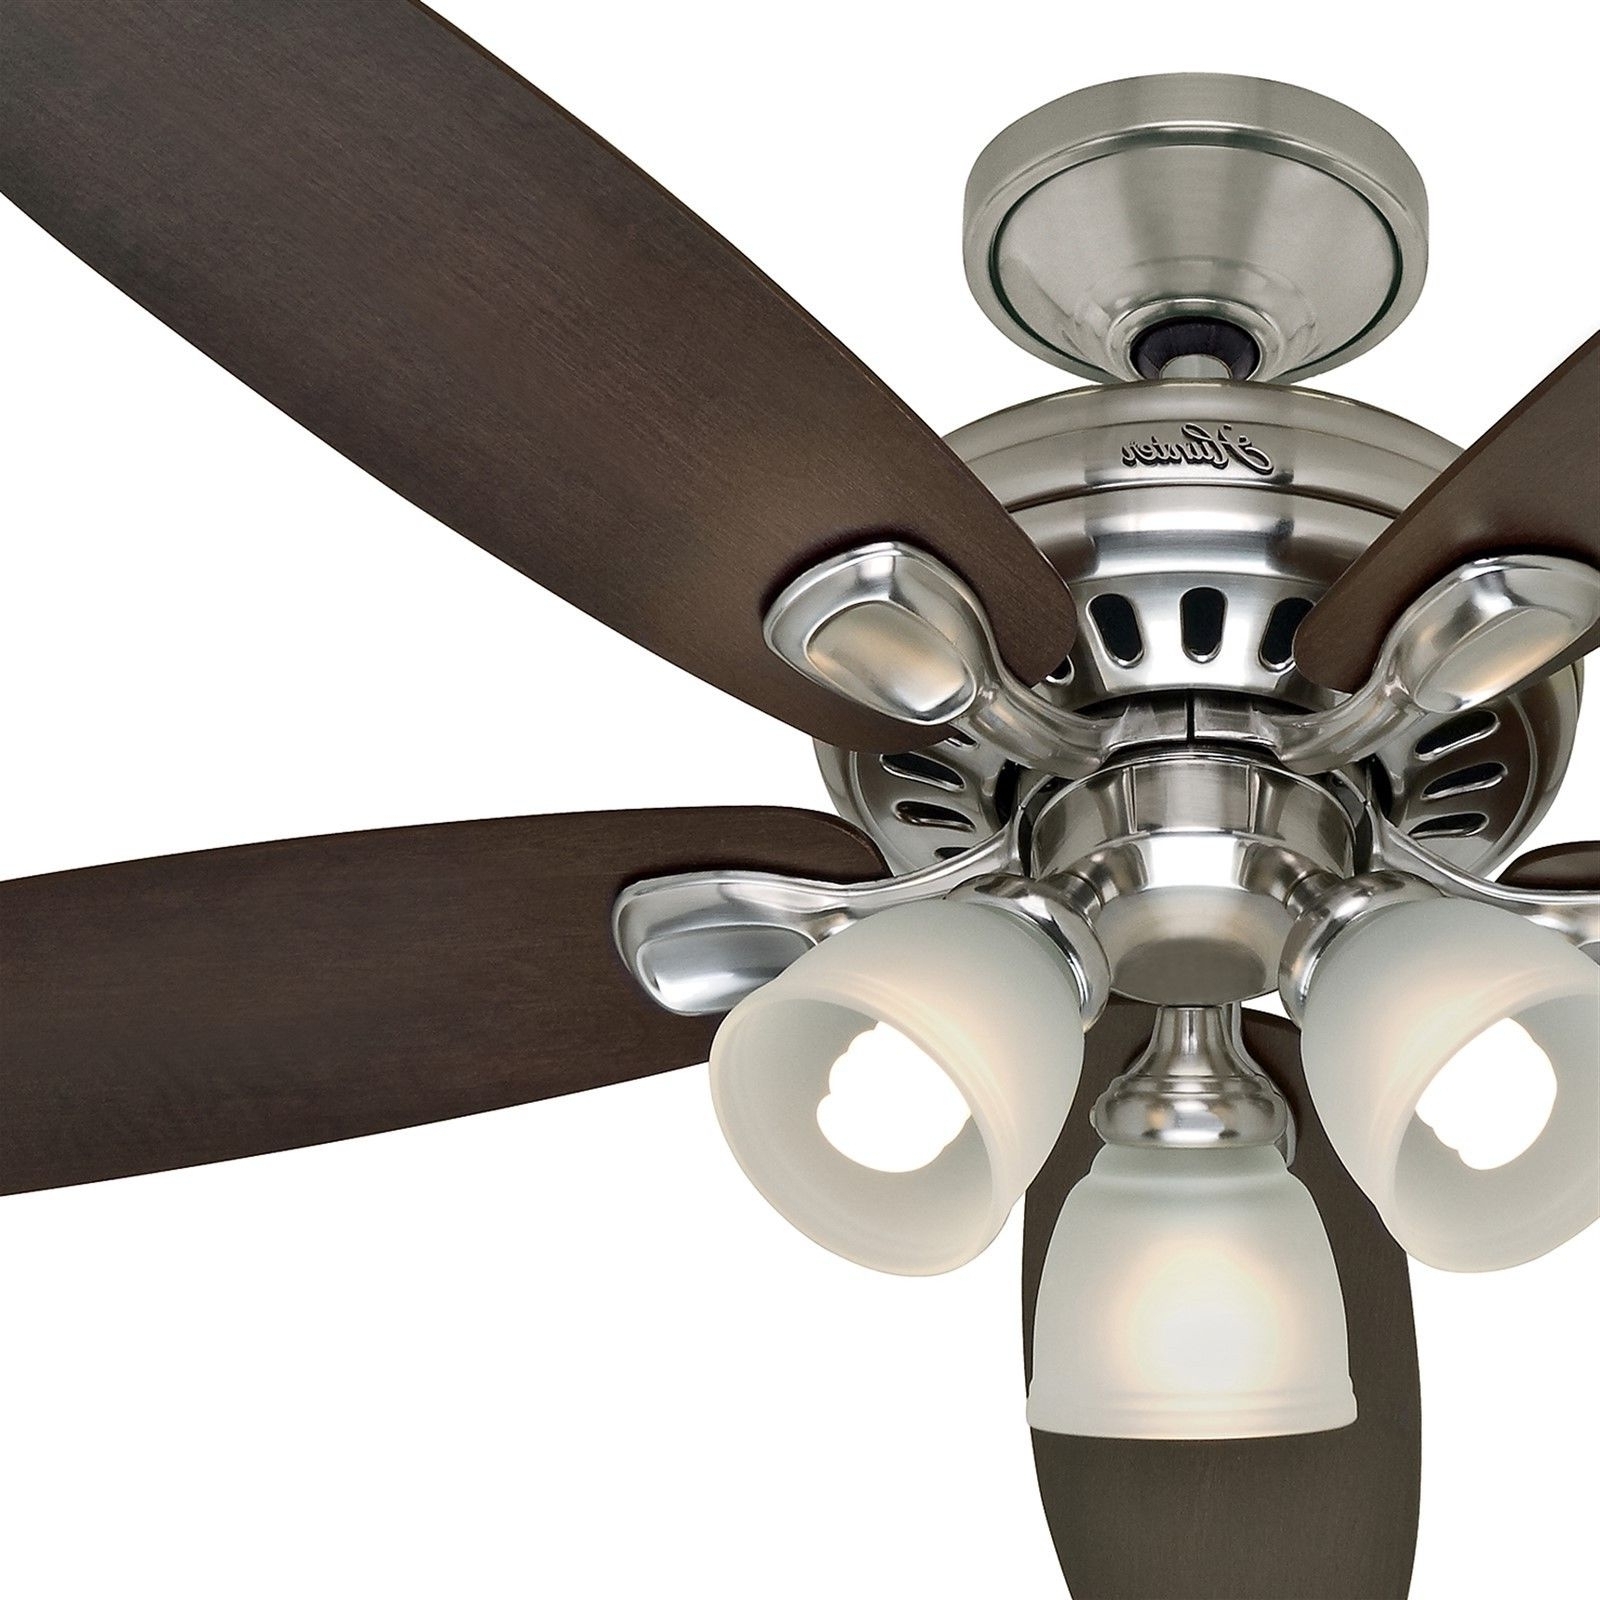 Hunter Ceiling Fan And Light Control 27183